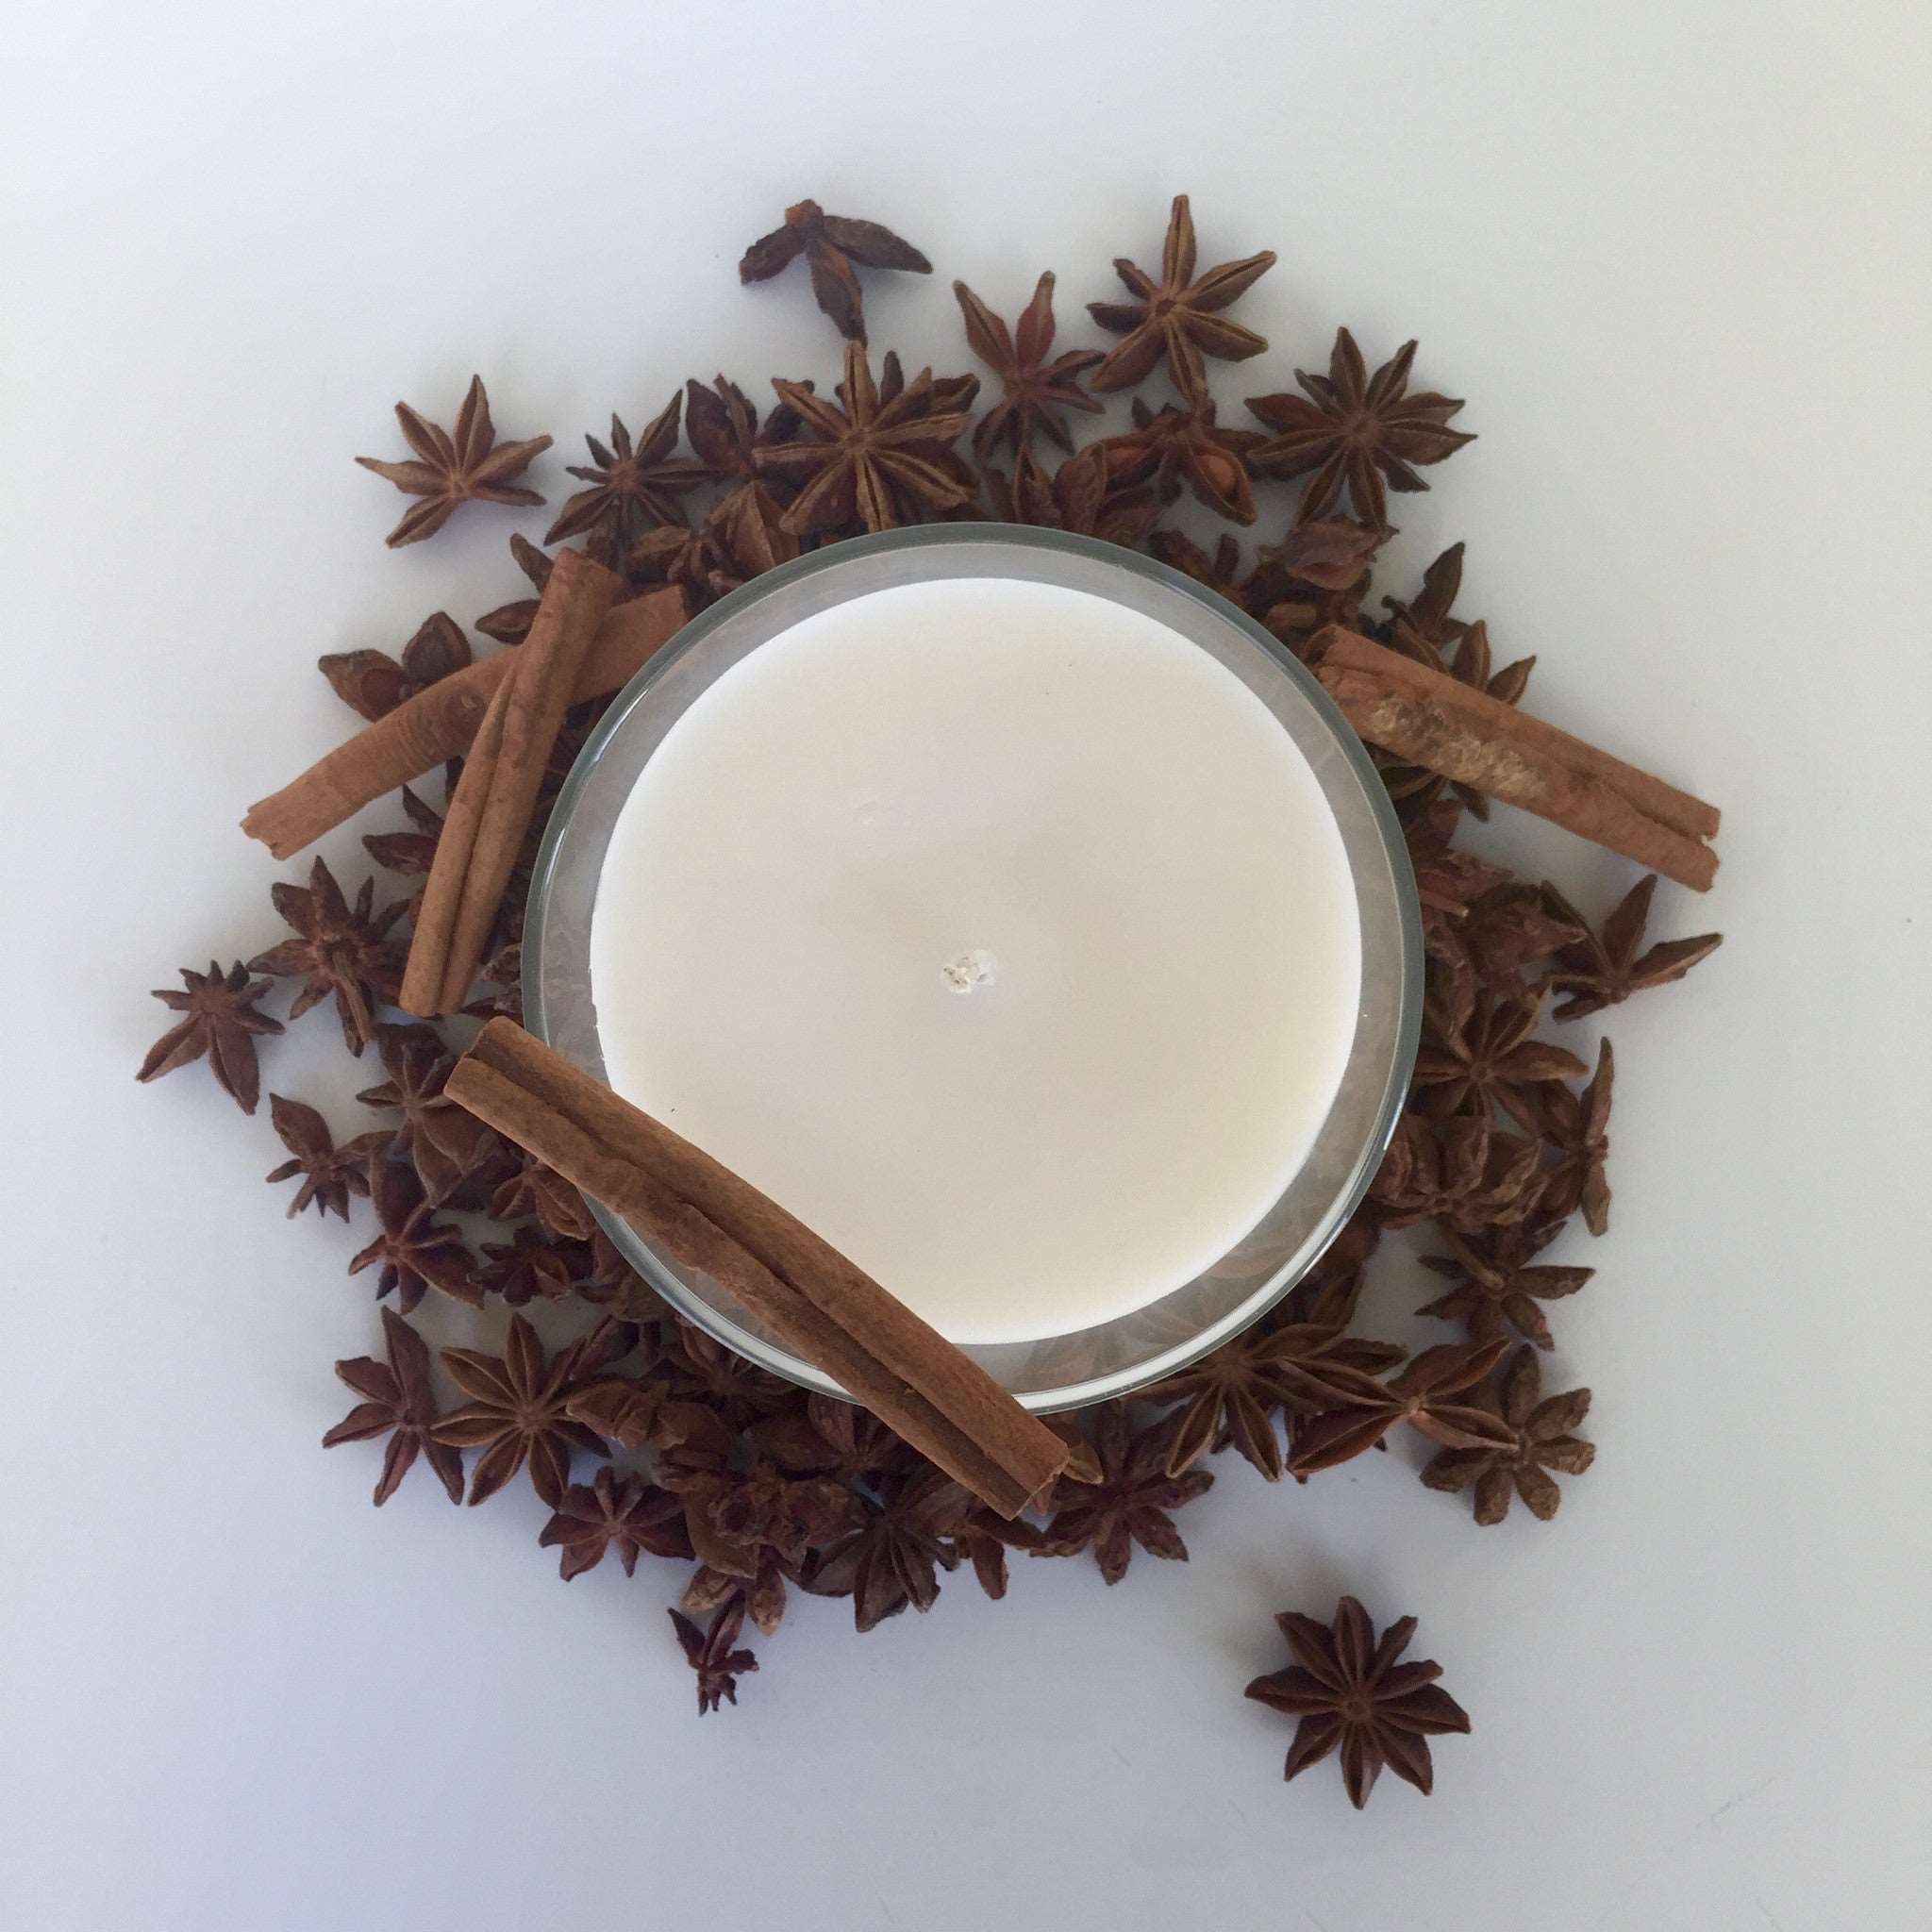 This warm calming scent eases respiratory problems, acts as a natural mosquito and bug repellent, heightens stimulation, serves as an antidepressant, increases energy levels, and helps the mind focus.  This all natural soy candle will fill your space with the warm scent of delicious Spicy Chai!  Over 65 hours of burn time!